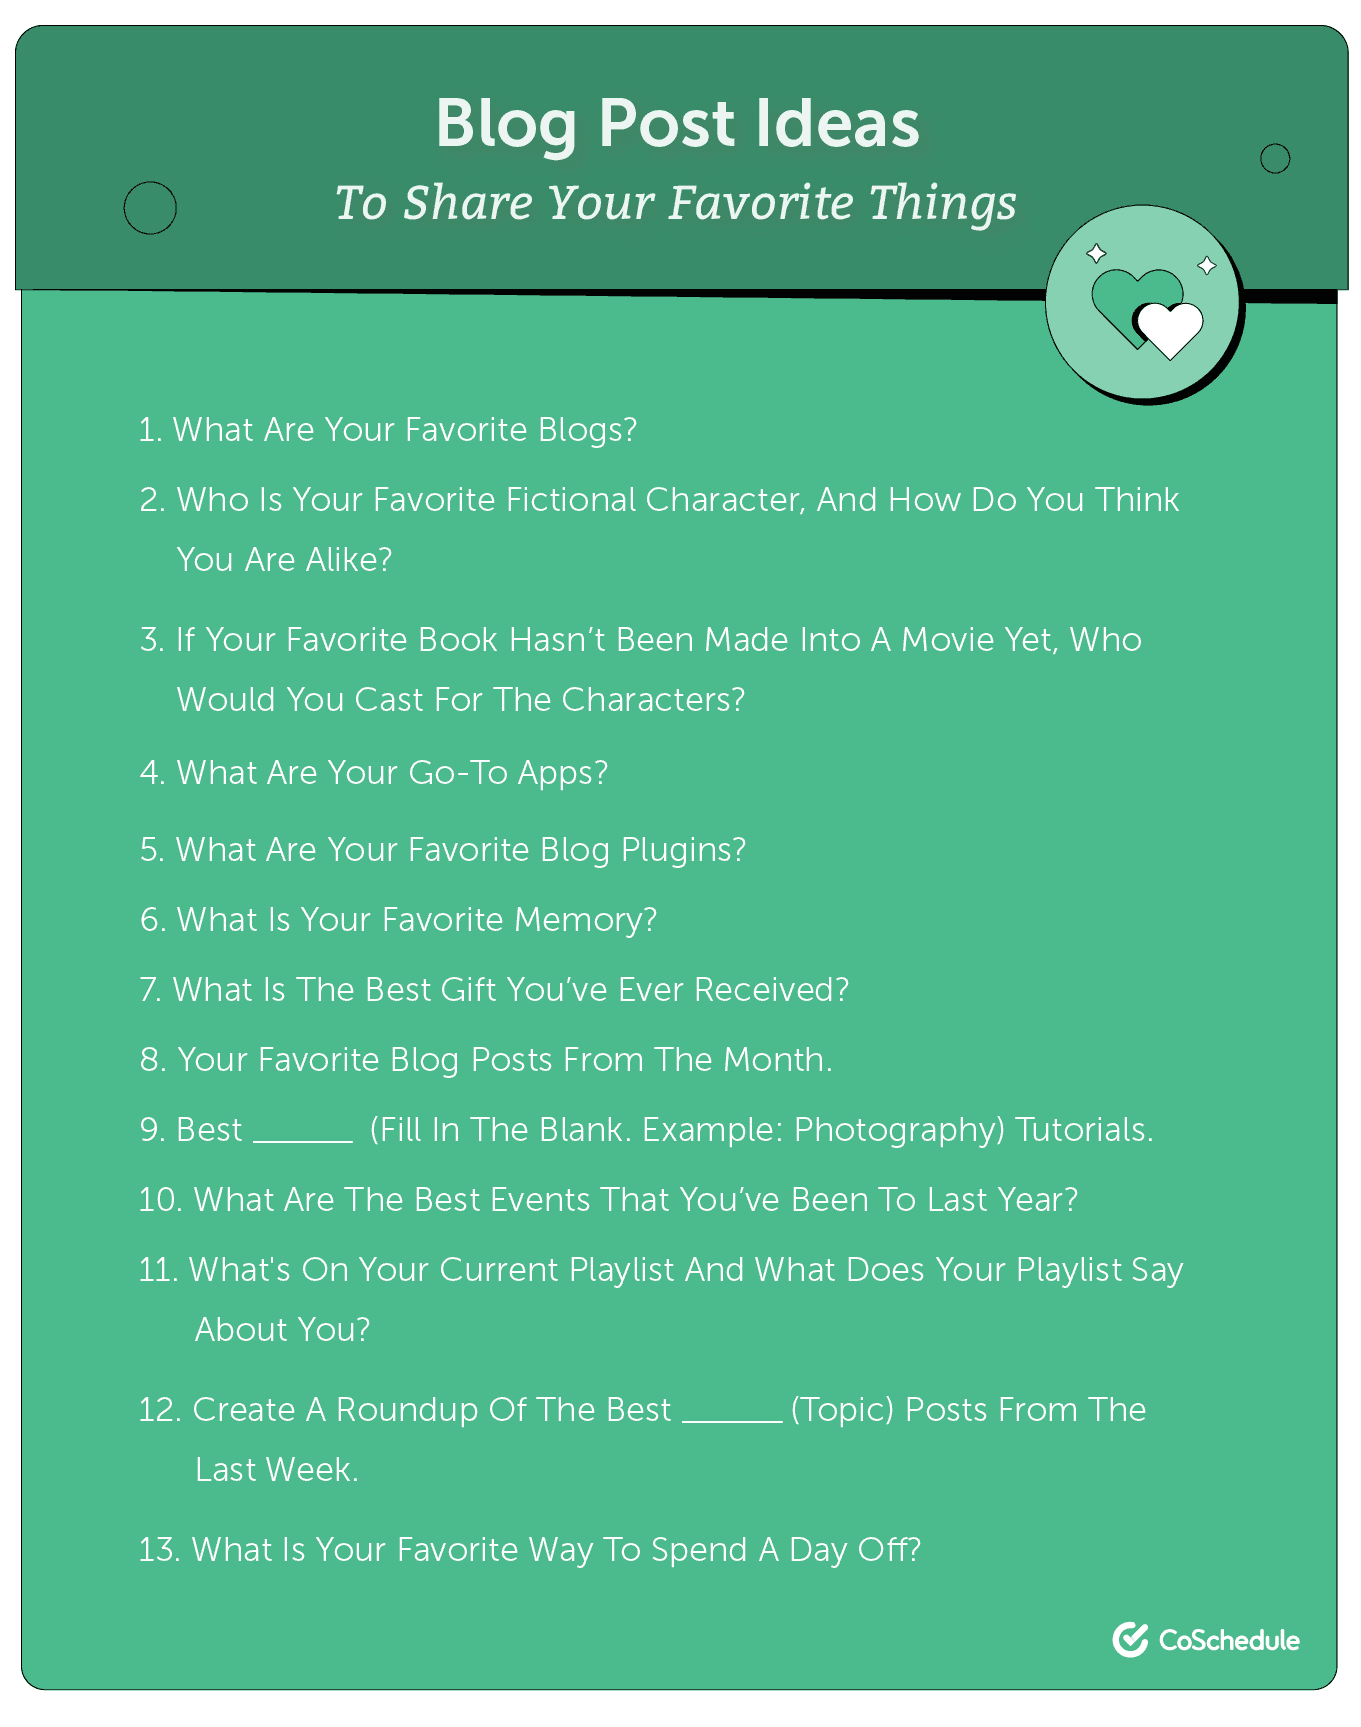 Blog post ideas for sharing your favorite things.